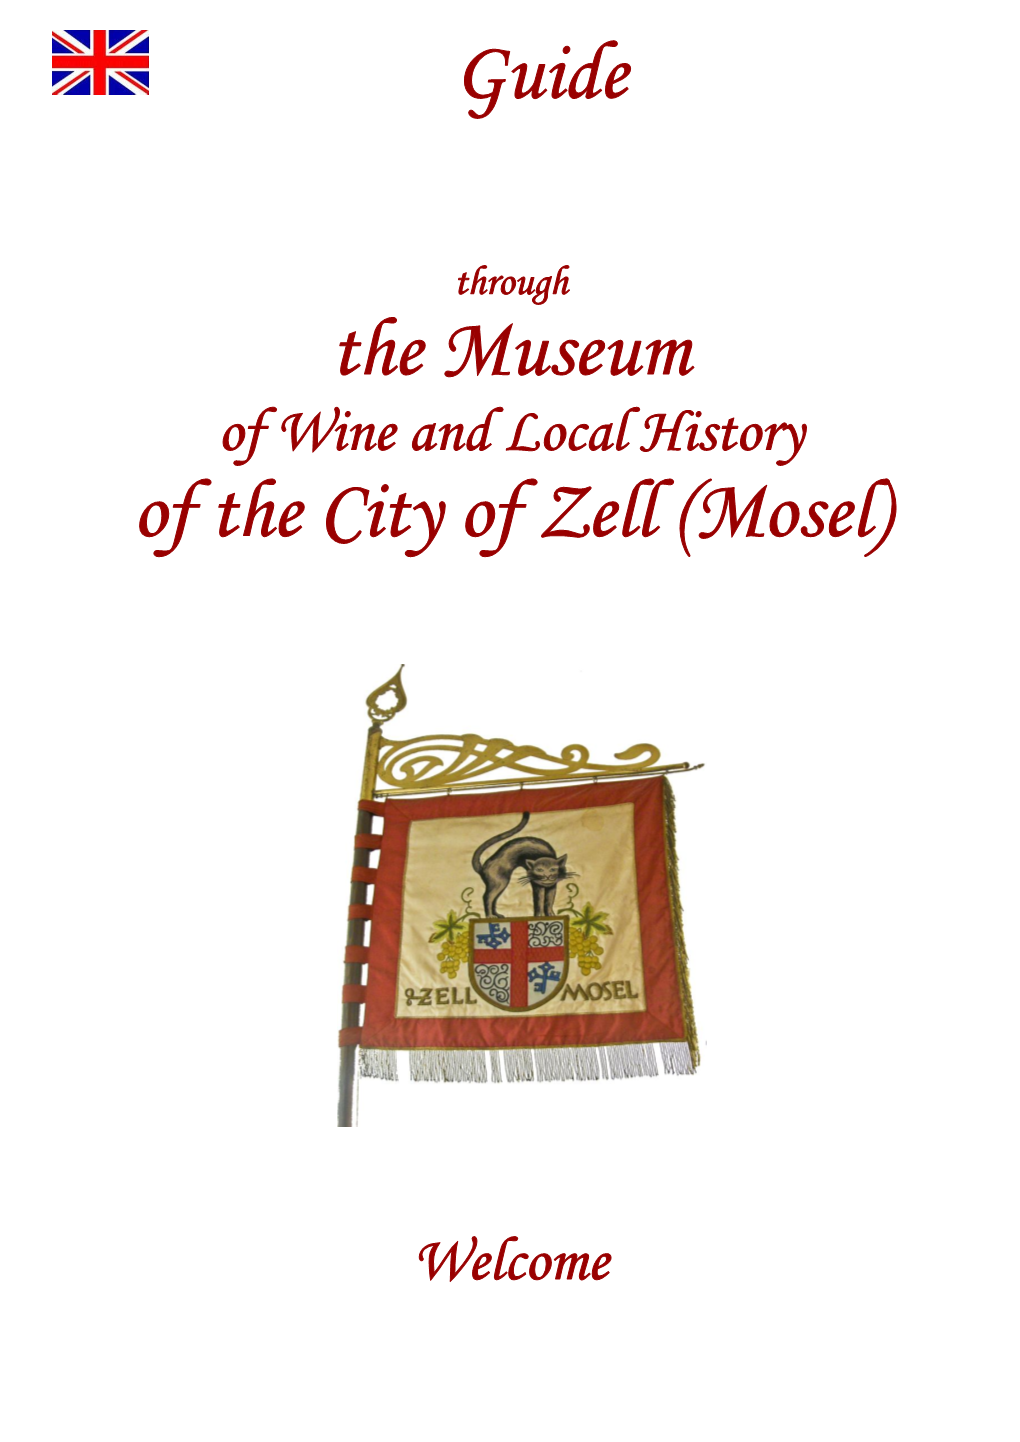 Guide the Museum of the City of Zell (Mosel)